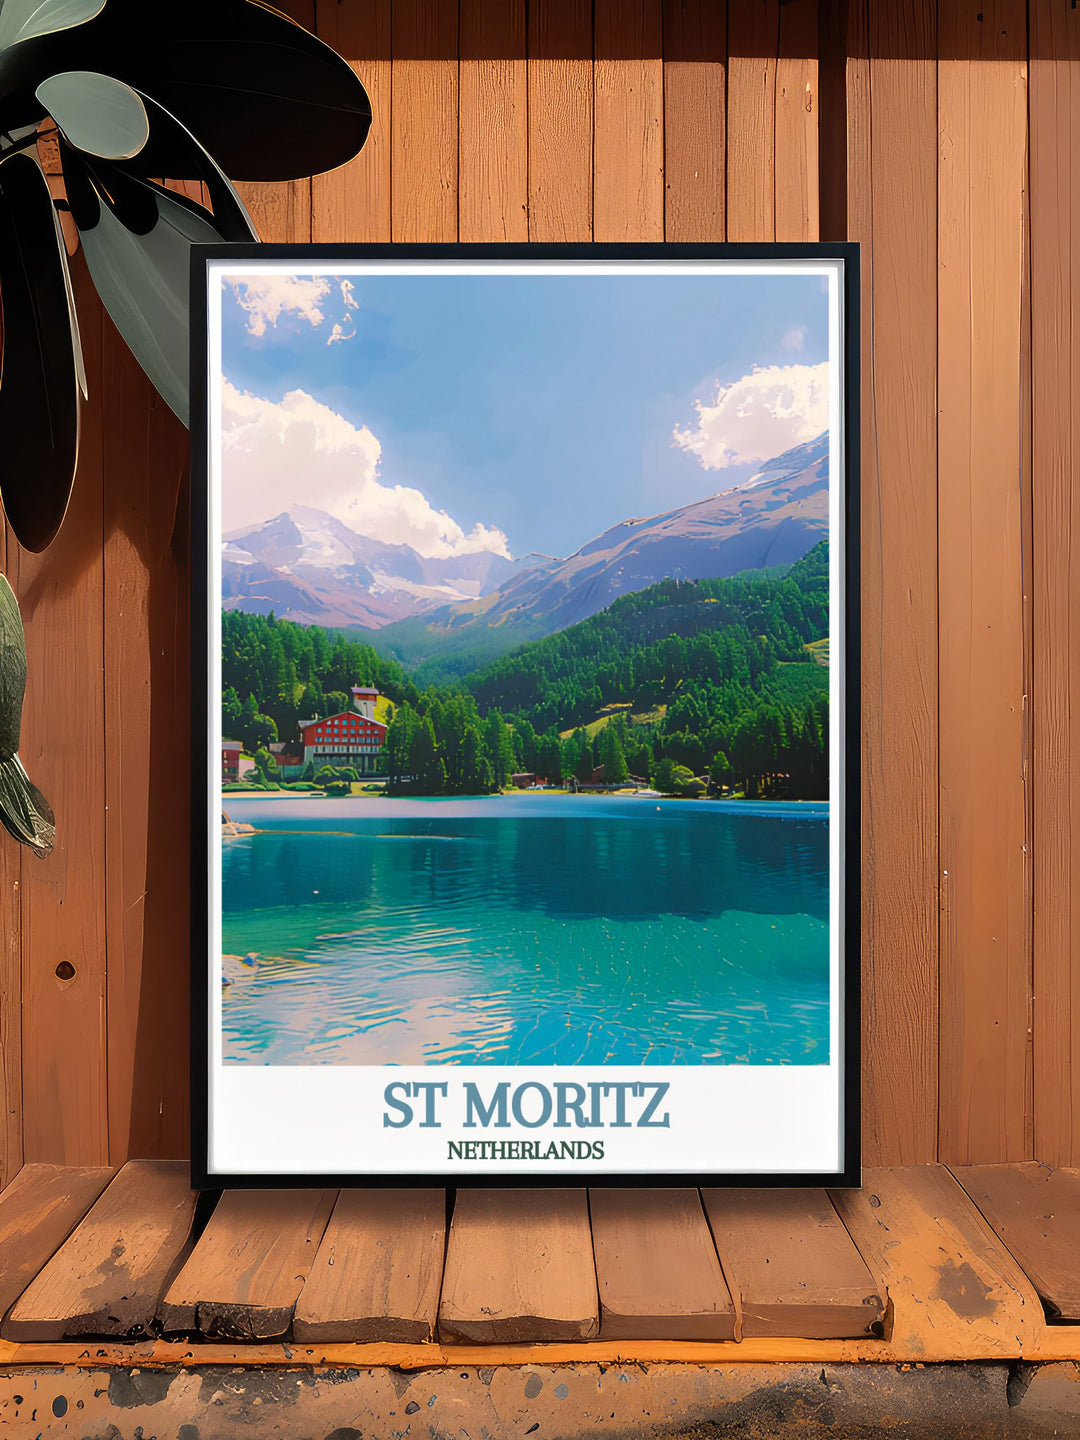 St Moritz and Lake St. Moritz are showcased in this vibrant travel poster, offering a glimpse into the breathtaking beauty and rich heritage of Switzerlands alpine region.